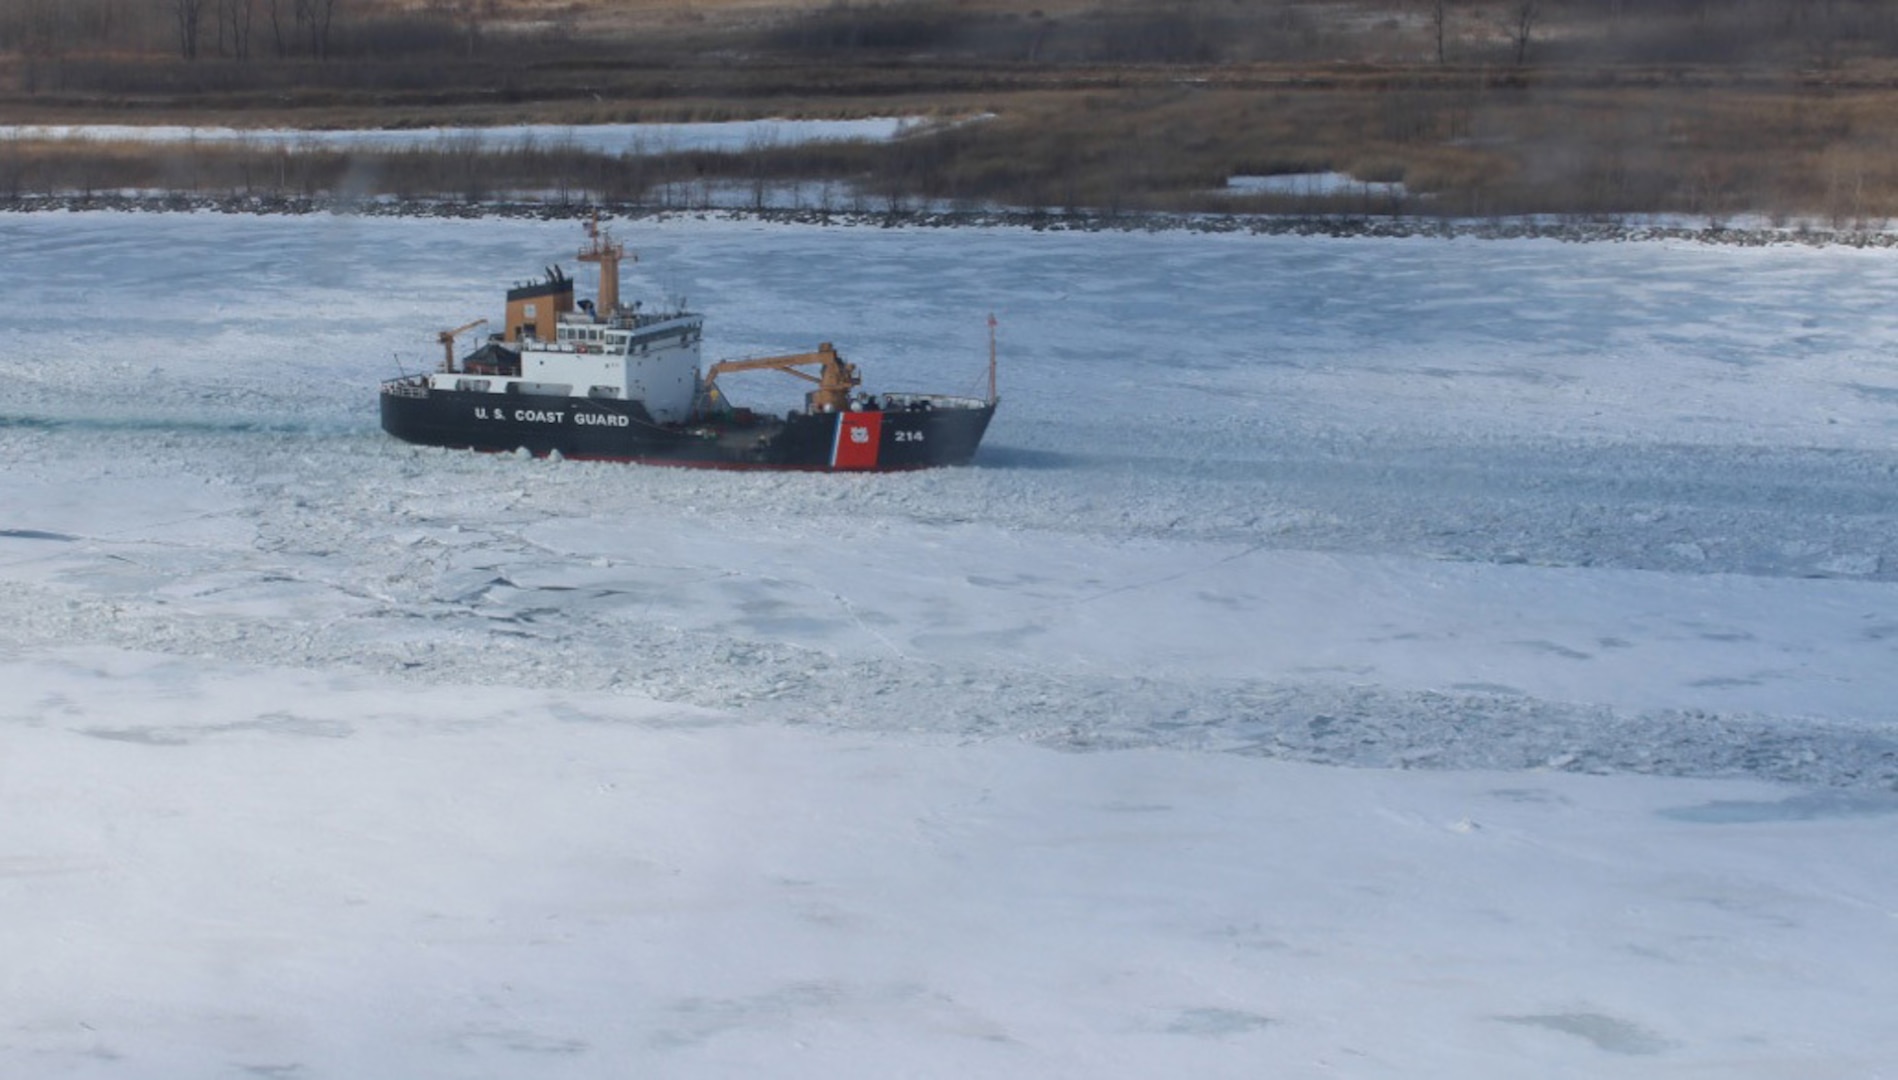 The crew of Coast Guard Cutter Hollyhock, a 225-foot sea-going buoy tender home-ported in Port Huron, Mich., breaks through the ice in the St. Clair River, Feb. 26, 2014. There are nine ice-breaking capable cutters home-ported in the Great Lakes region.